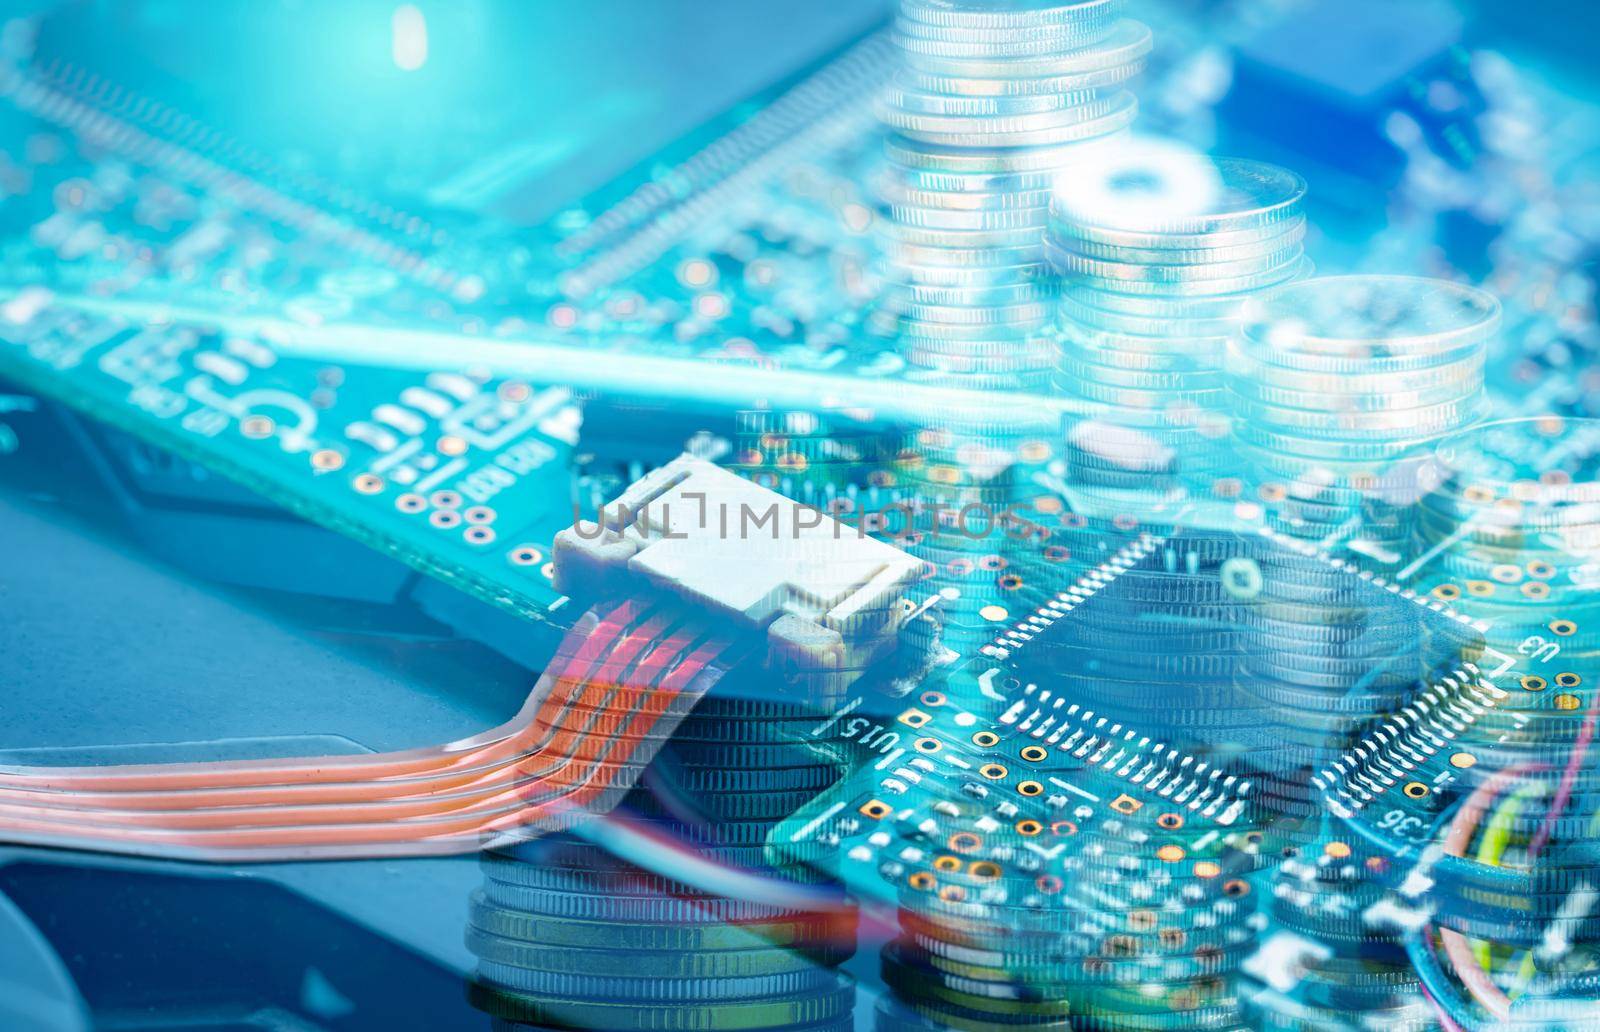 Electronic circuit board and coin stack. Mainboard of computer. Electronic business industry.  Computer integrated circuit board. Memory of digital information hardware. Electronic engineering tech.